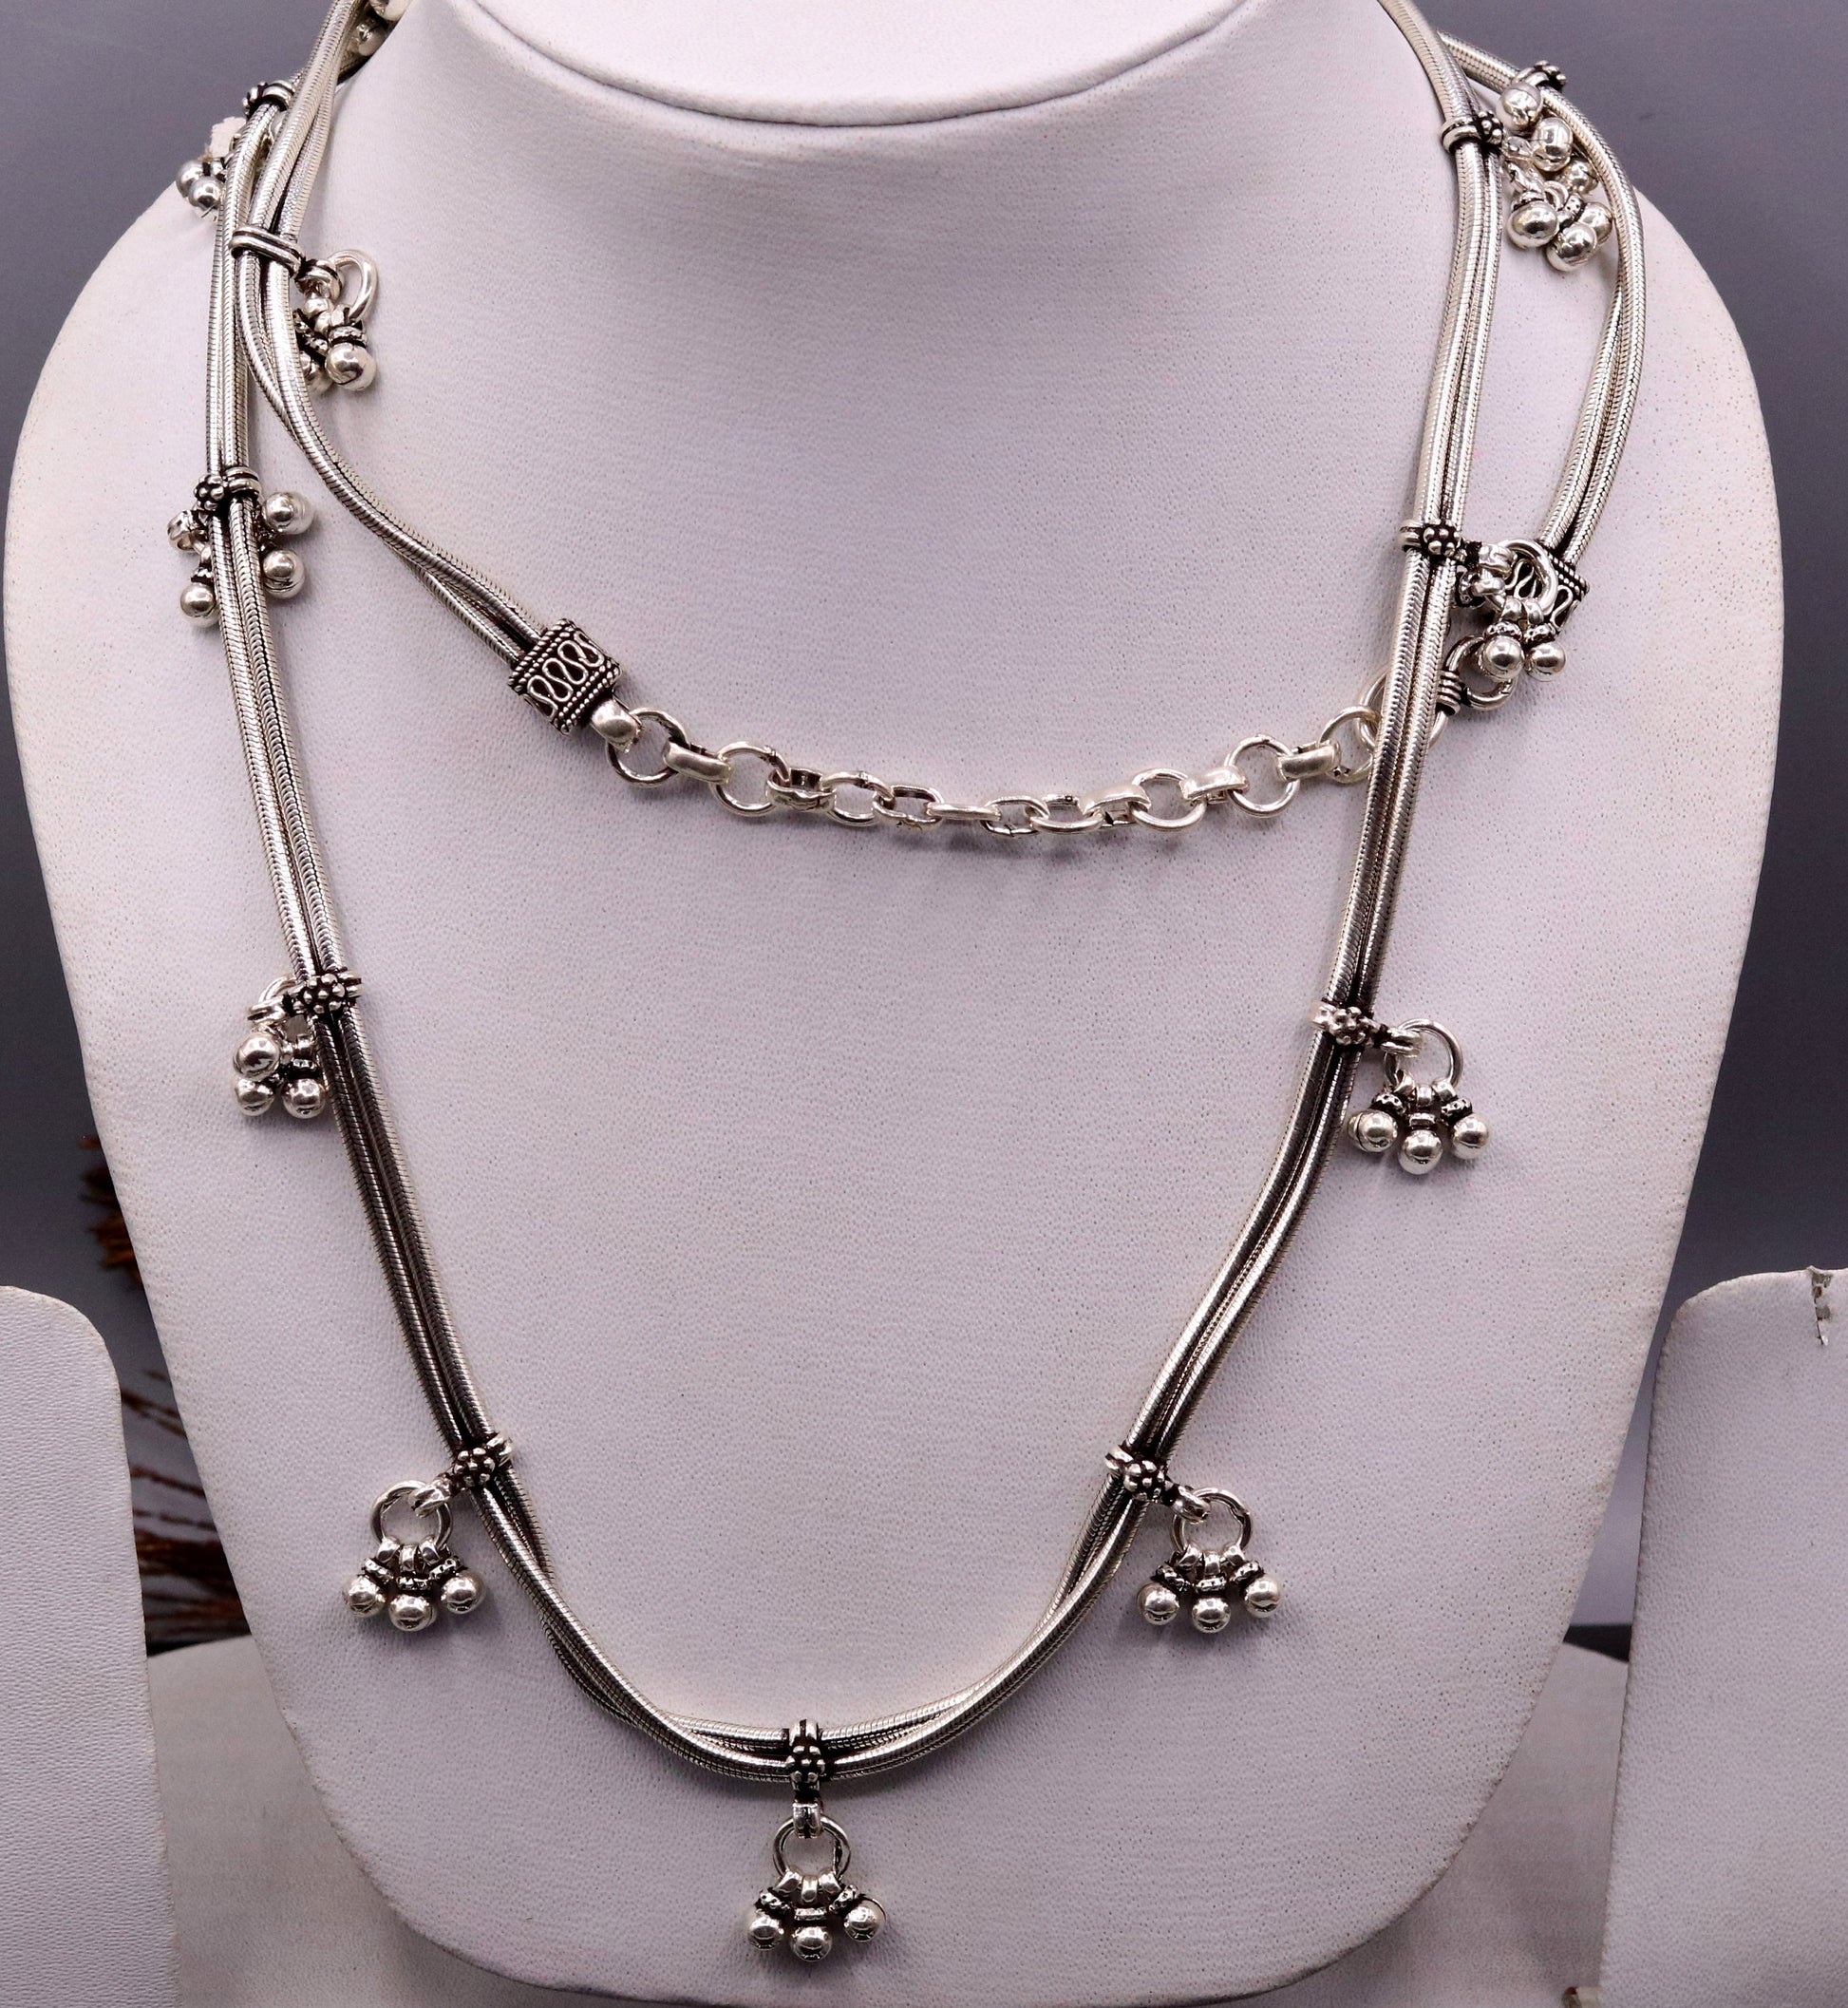 36 to 38 inches adjustable 925 sterling silver handmade vintage antique design belly chain,waist chain belly dance tribal jewelry wch06 - TRIBAL ORNAMENTS